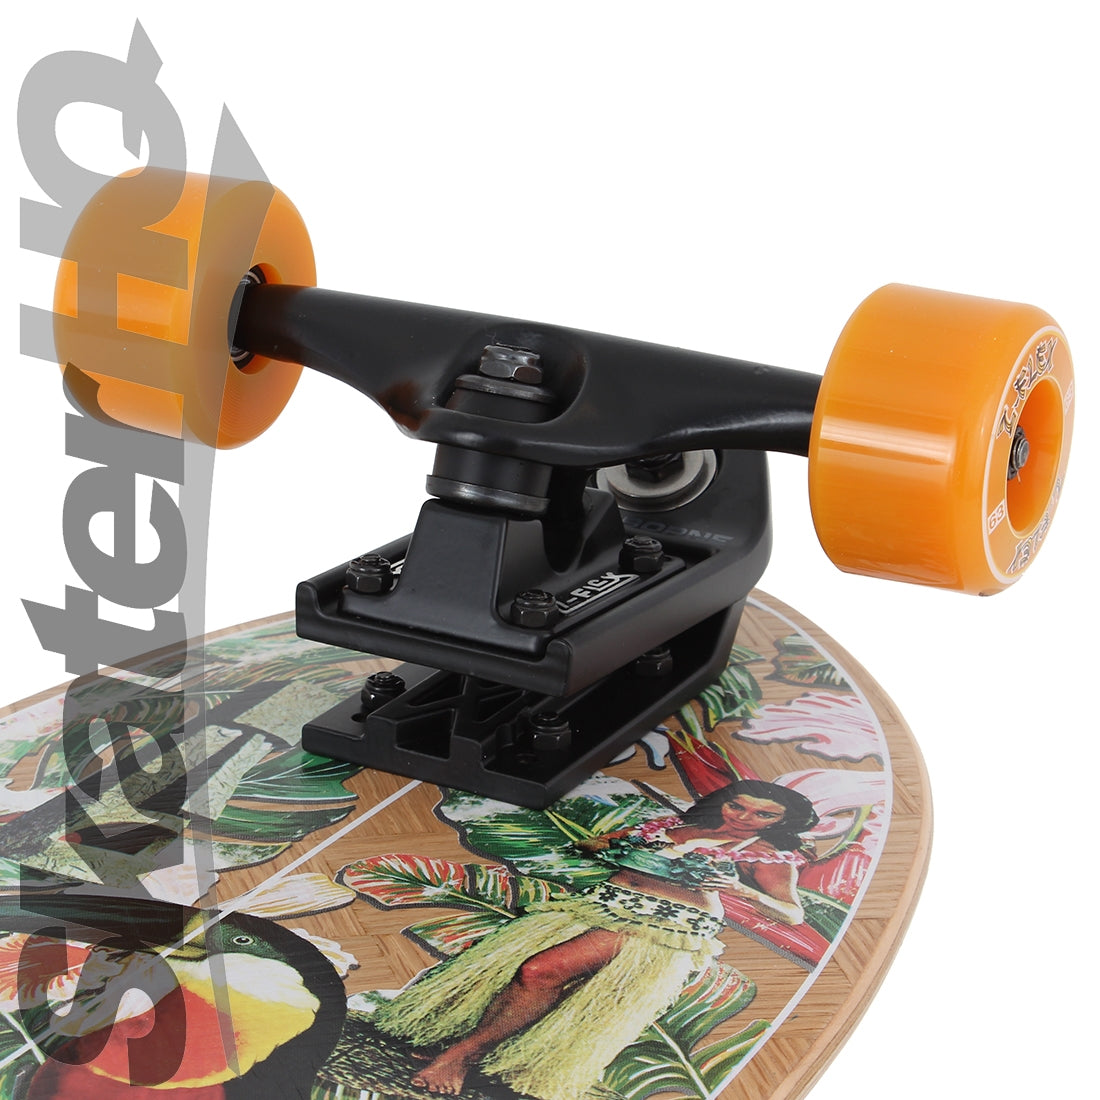 Z-Flex Banana Train 31 Surfskate Fish Complete Skateboard Compl Carving and Specialty